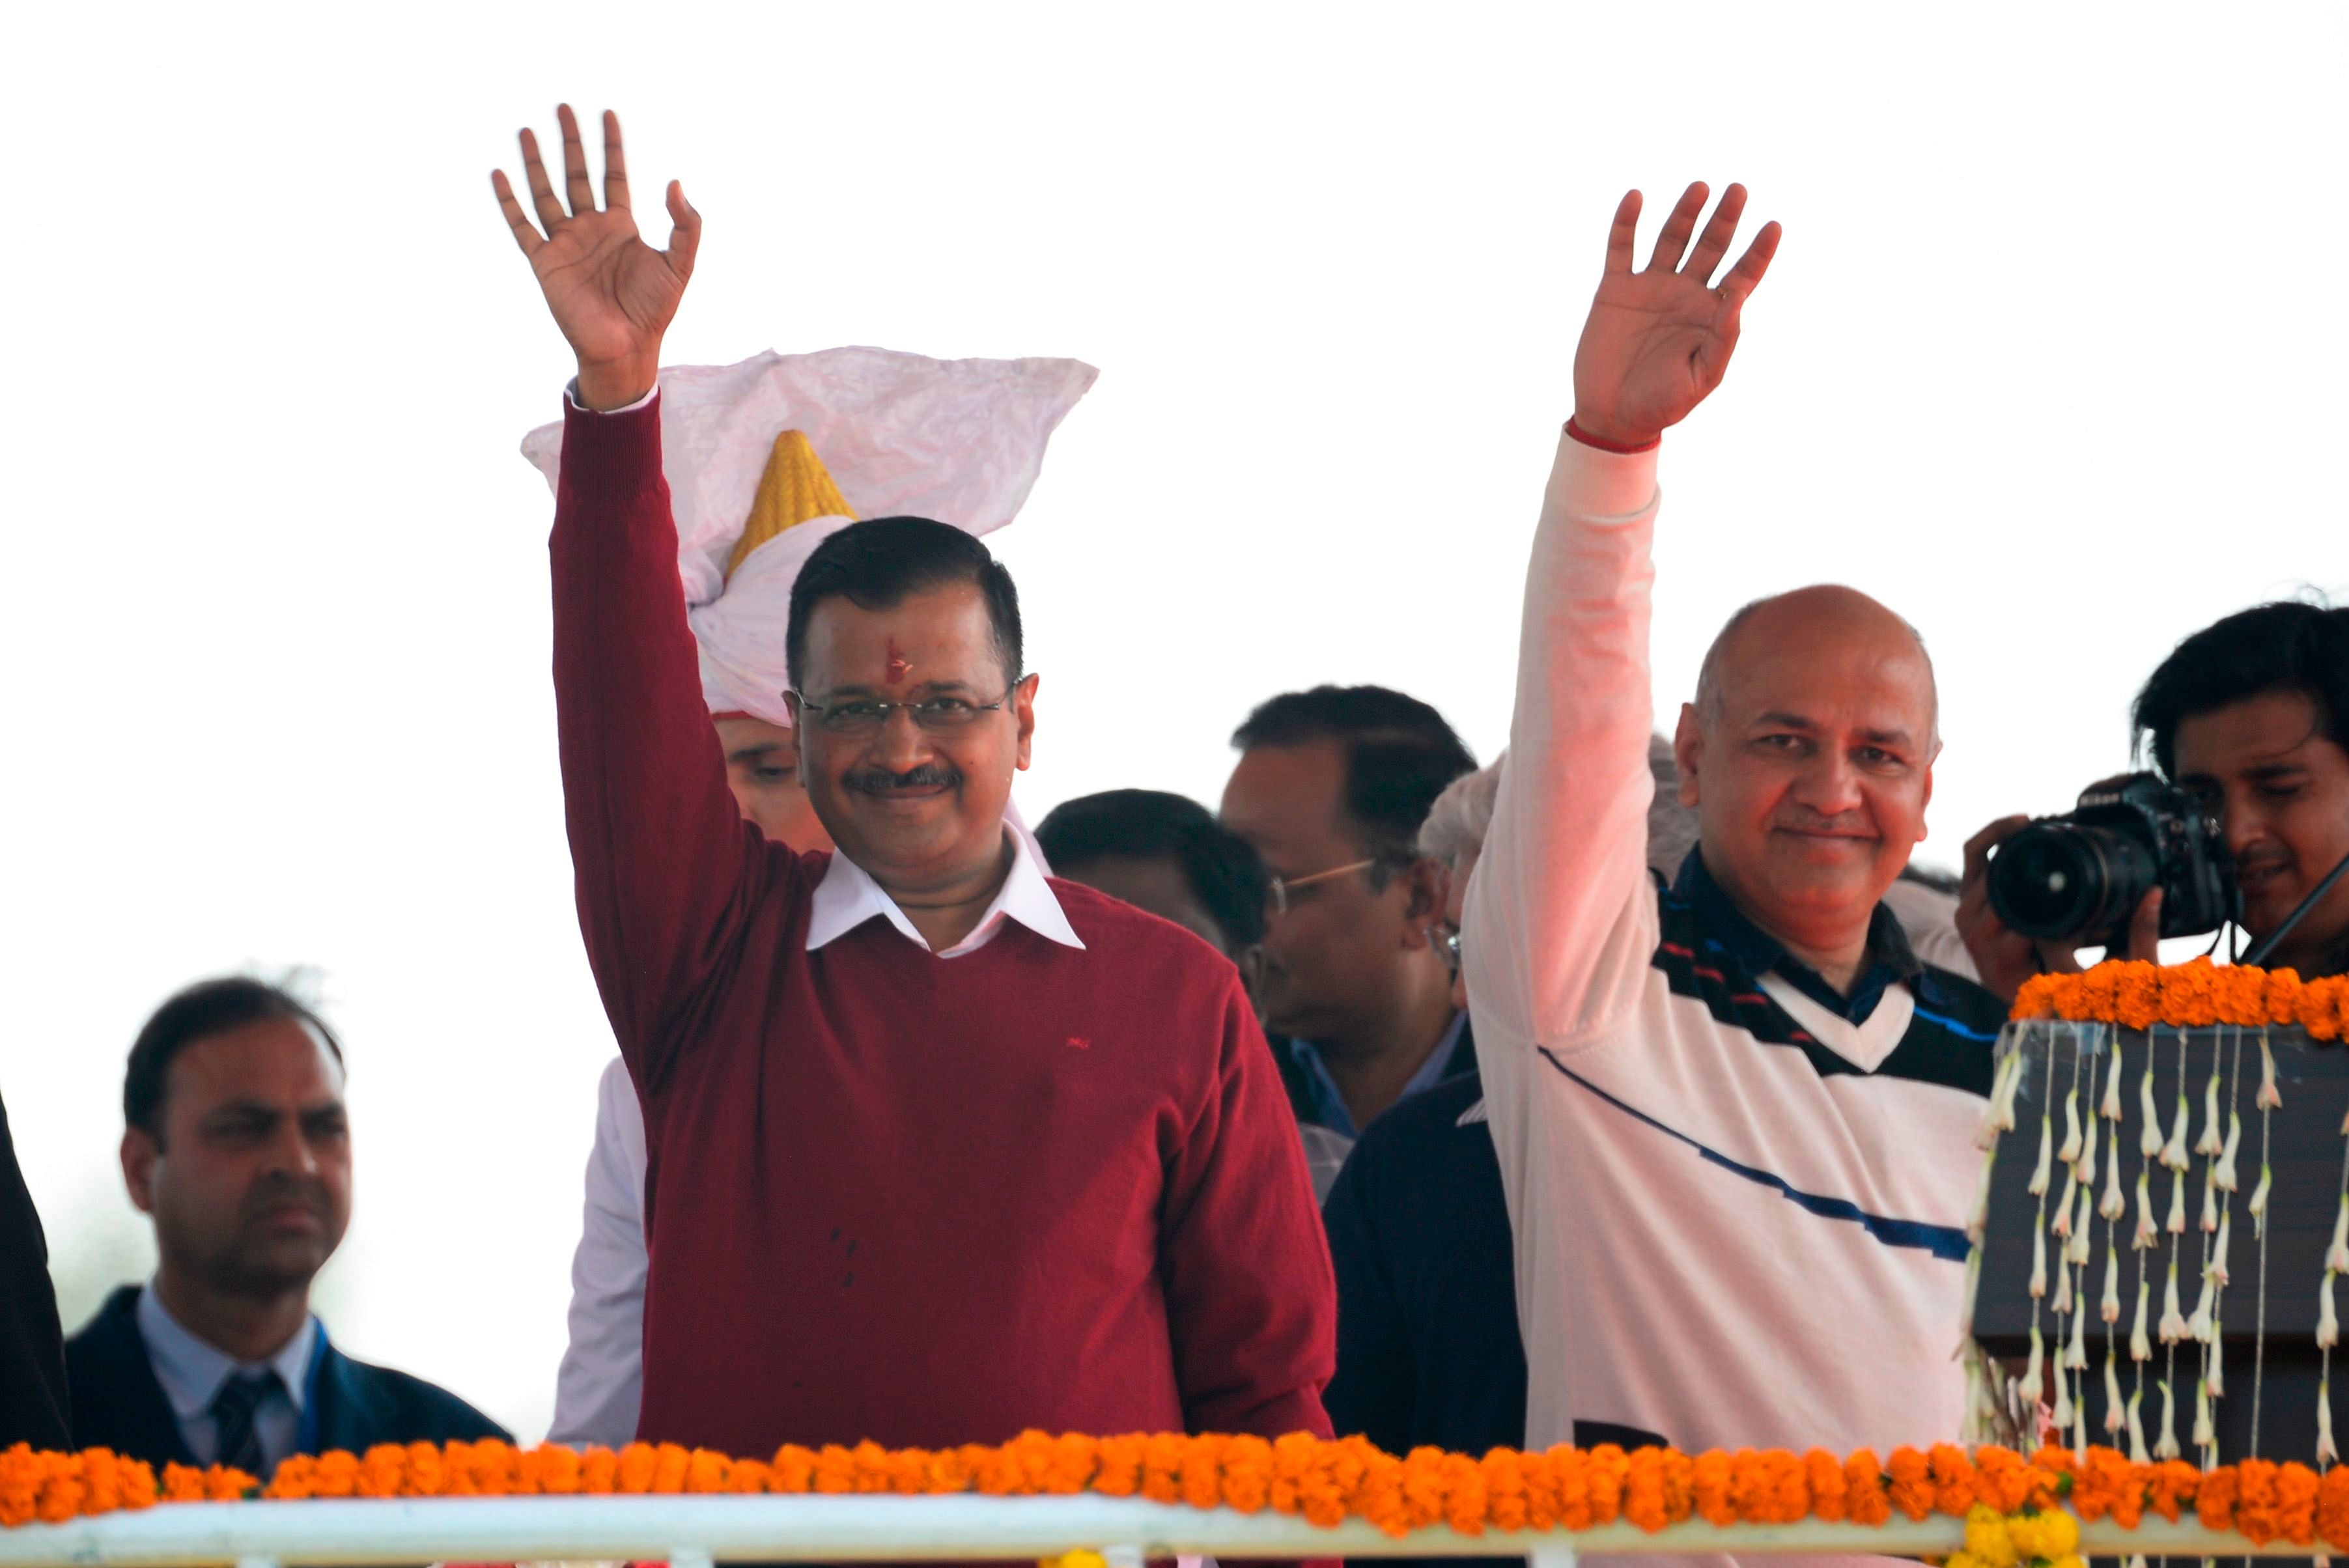 Chandra had contested against both AAP leaders in the recent Delhi Assembly polls. (Credit: AFP Photo)